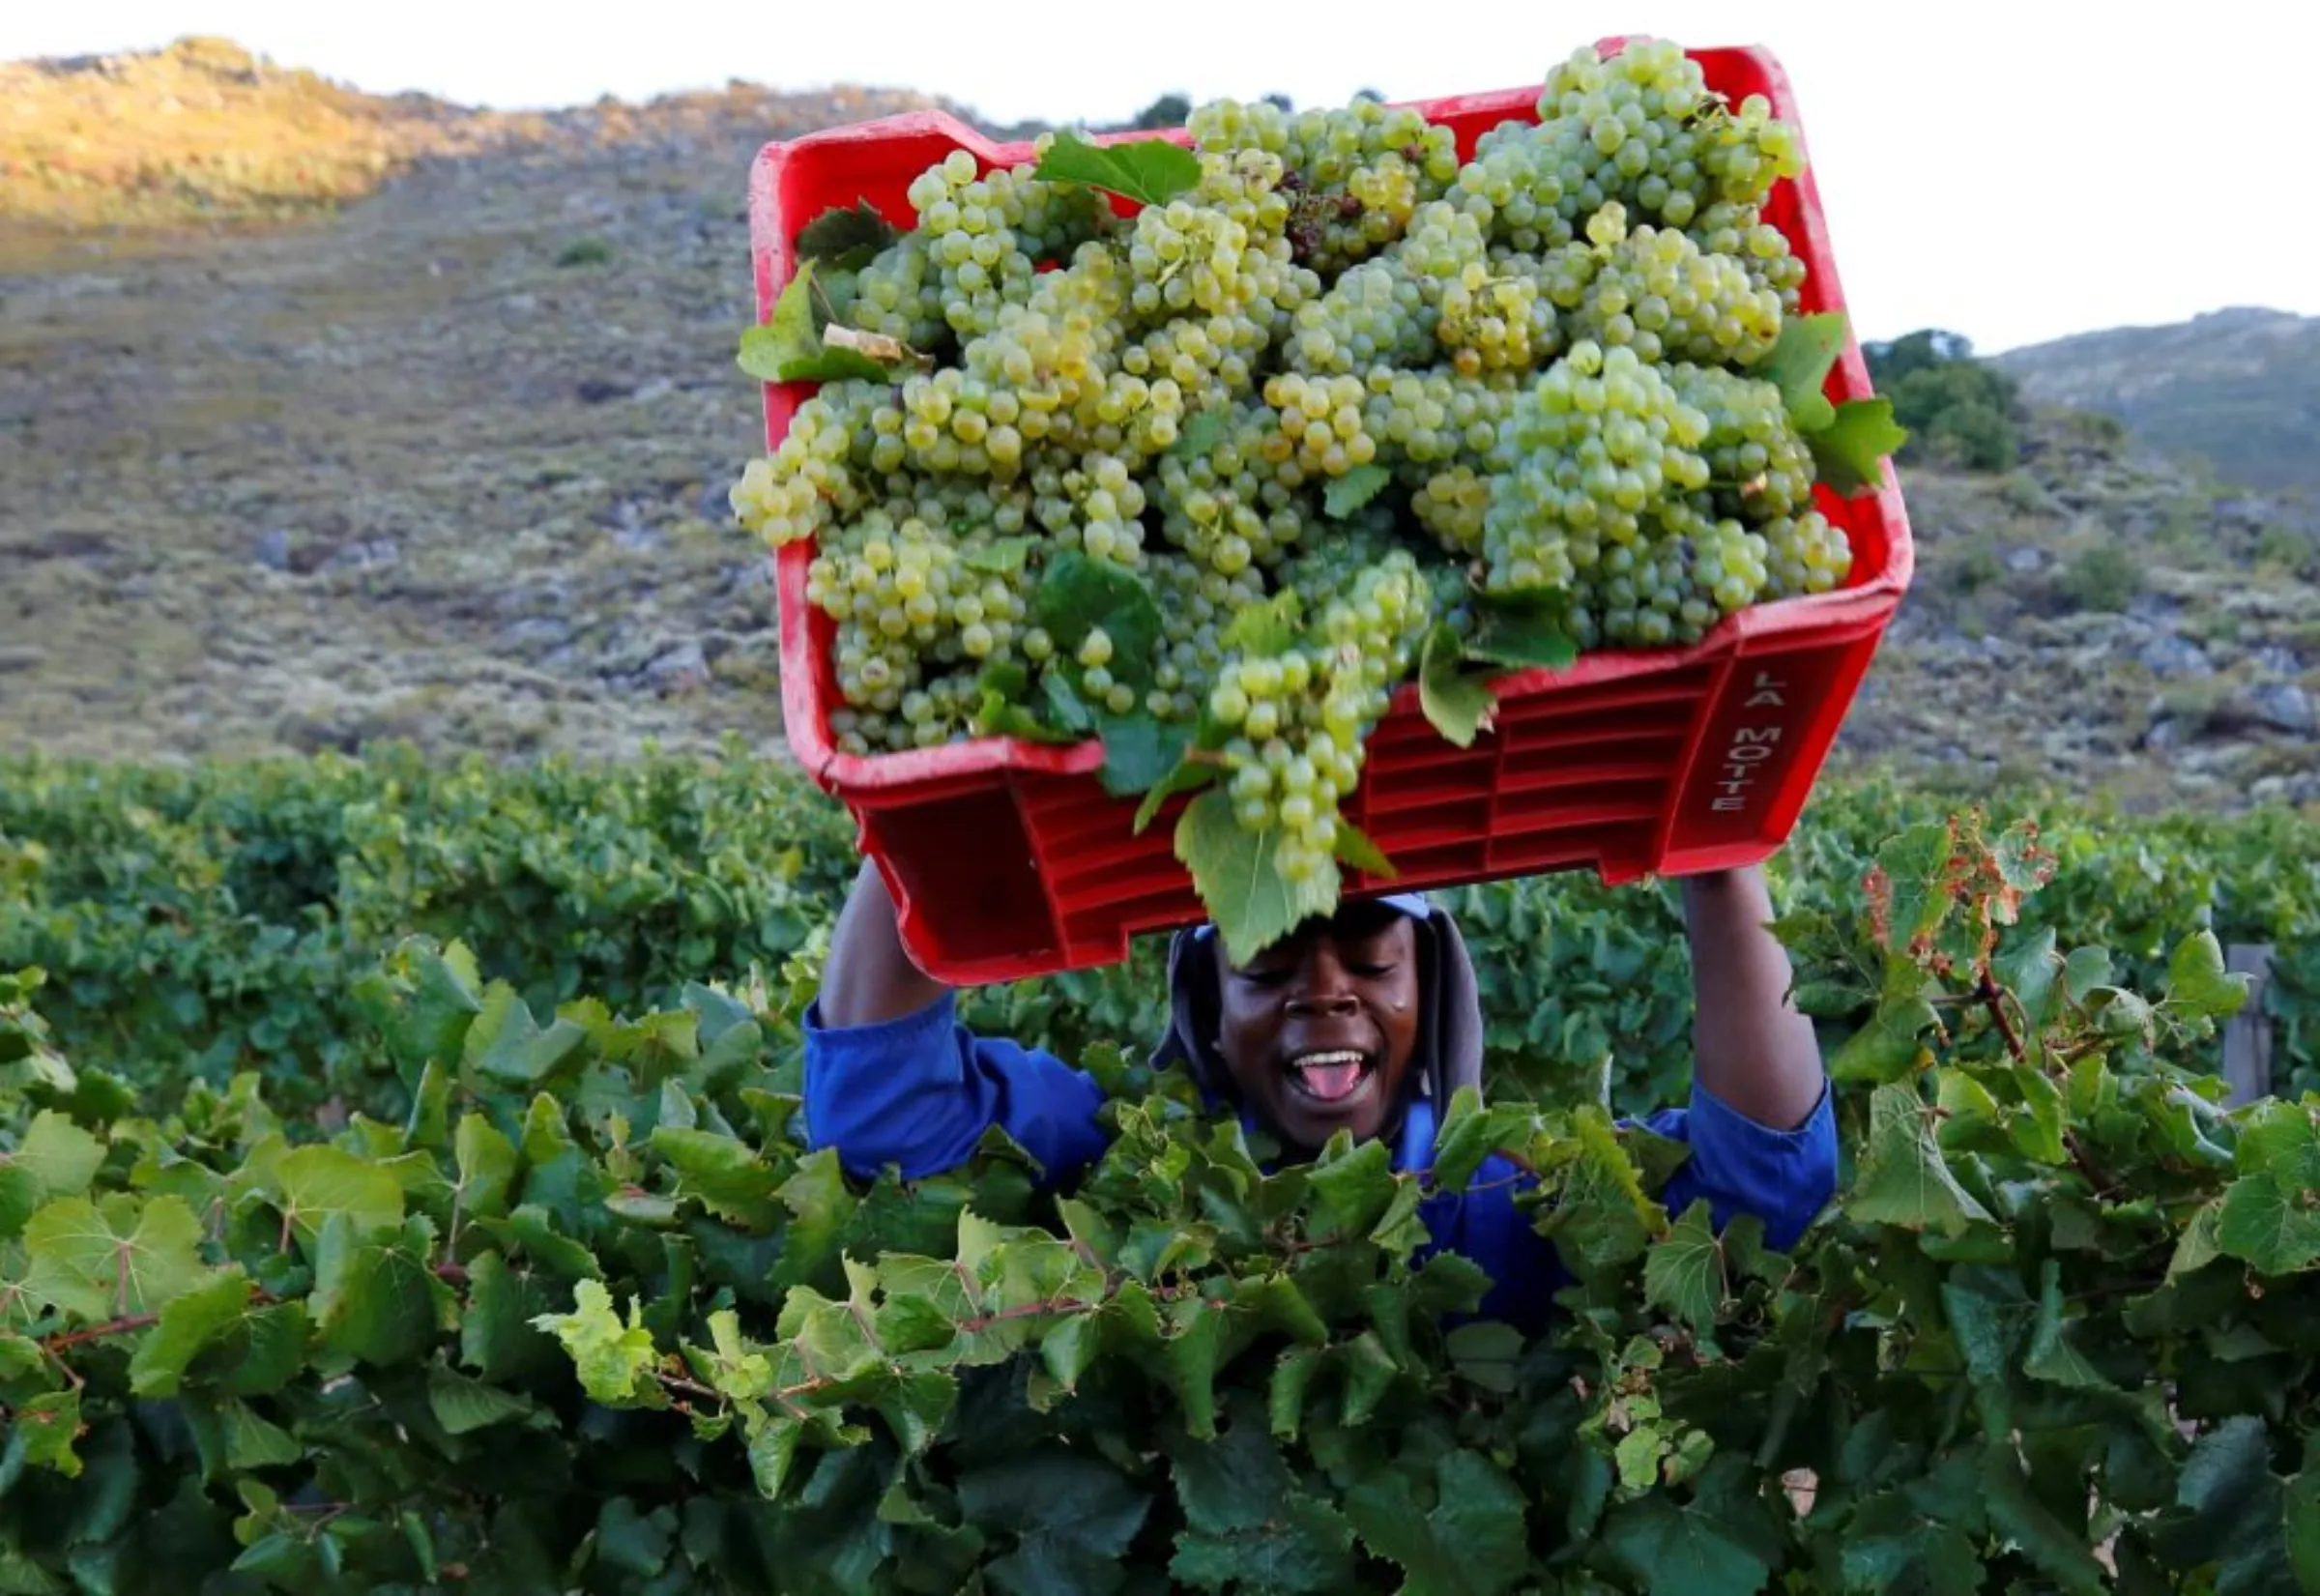 A worker harvests grapes at the La Motte wine farm in Franschhoek near Cape Town, South Africa in this picture taken January 29, 2016